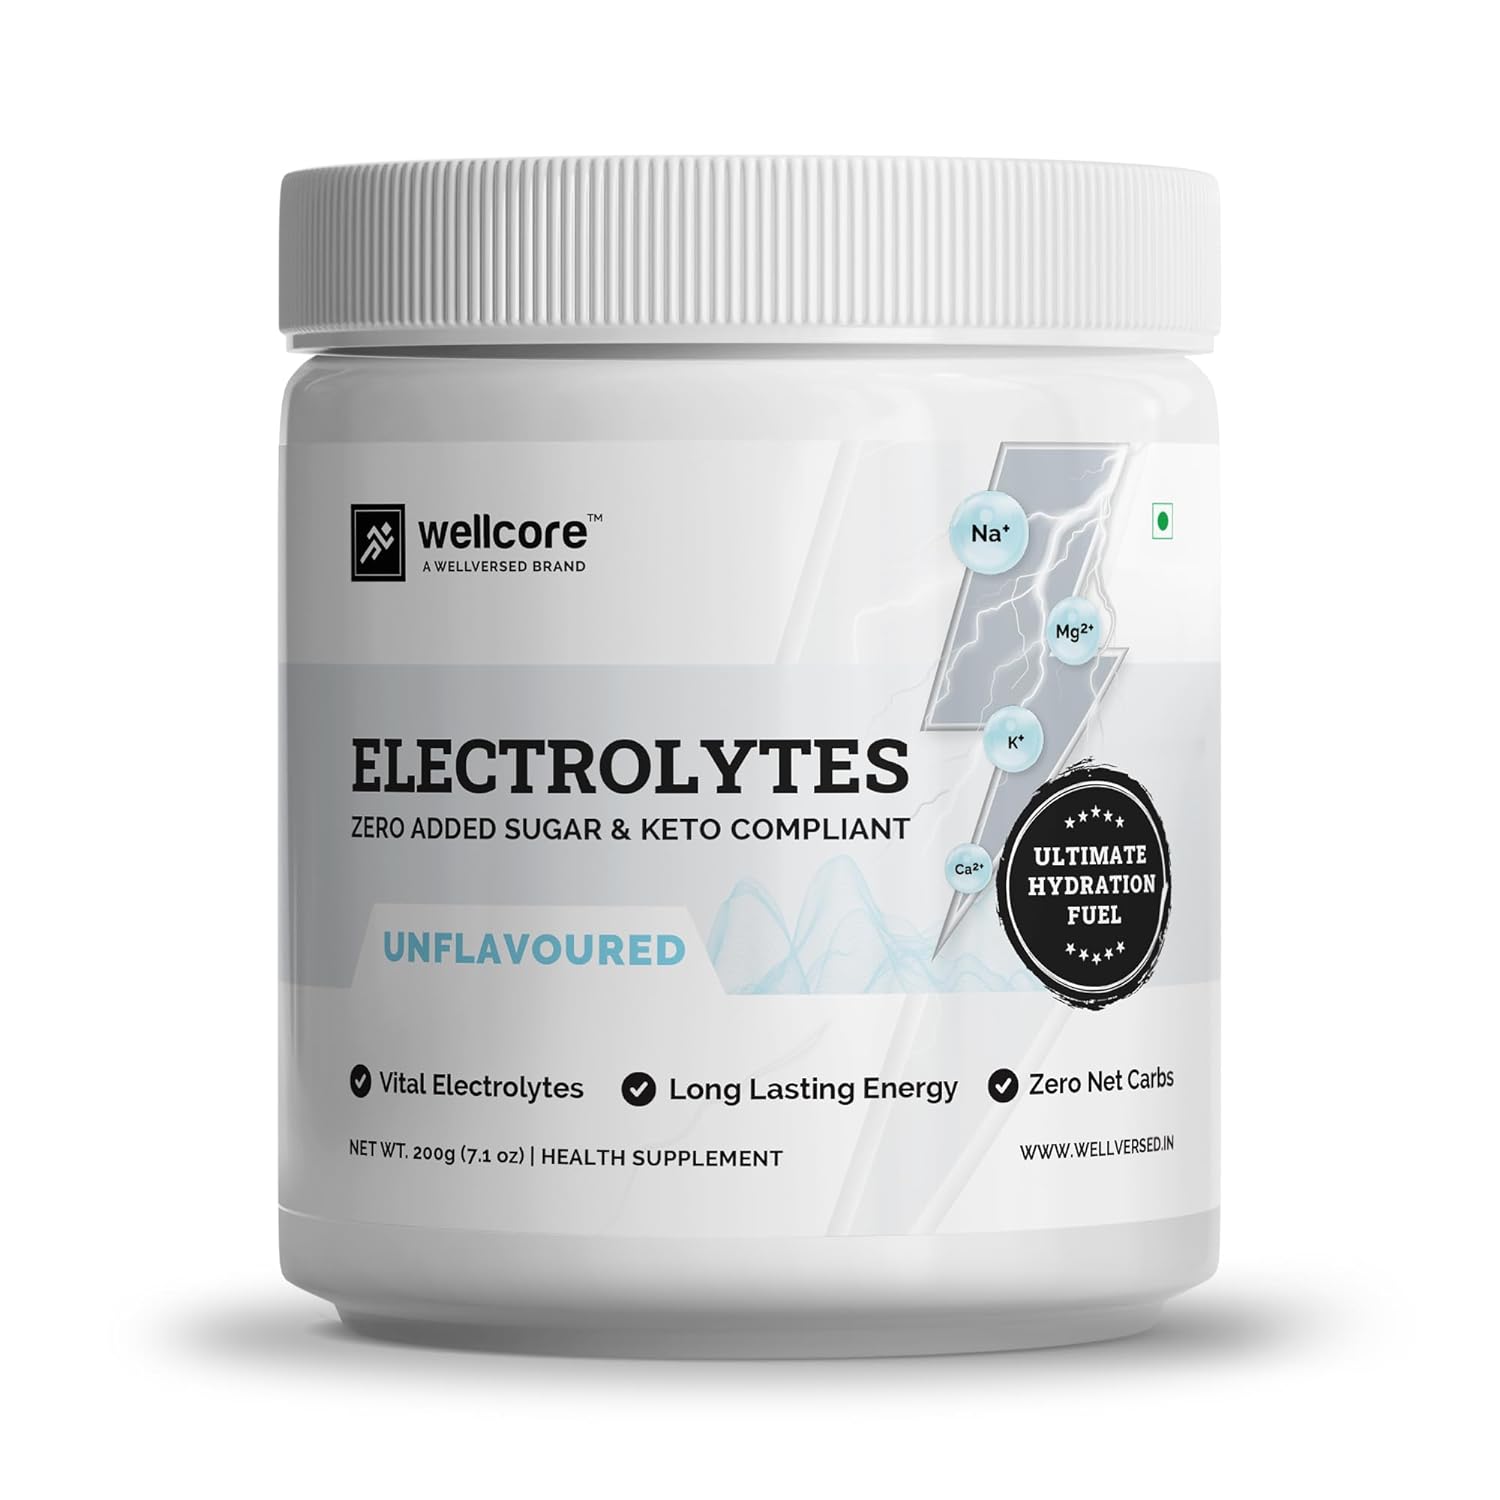 Wellcore - Electrolytes (Unflavoured, 200g)| Electrolyte Drink With 5 Vital Electrolytes: Na, Mg, Ca, K, PO4 | Sugar Free Electrolyte Powder | Fat Fuel